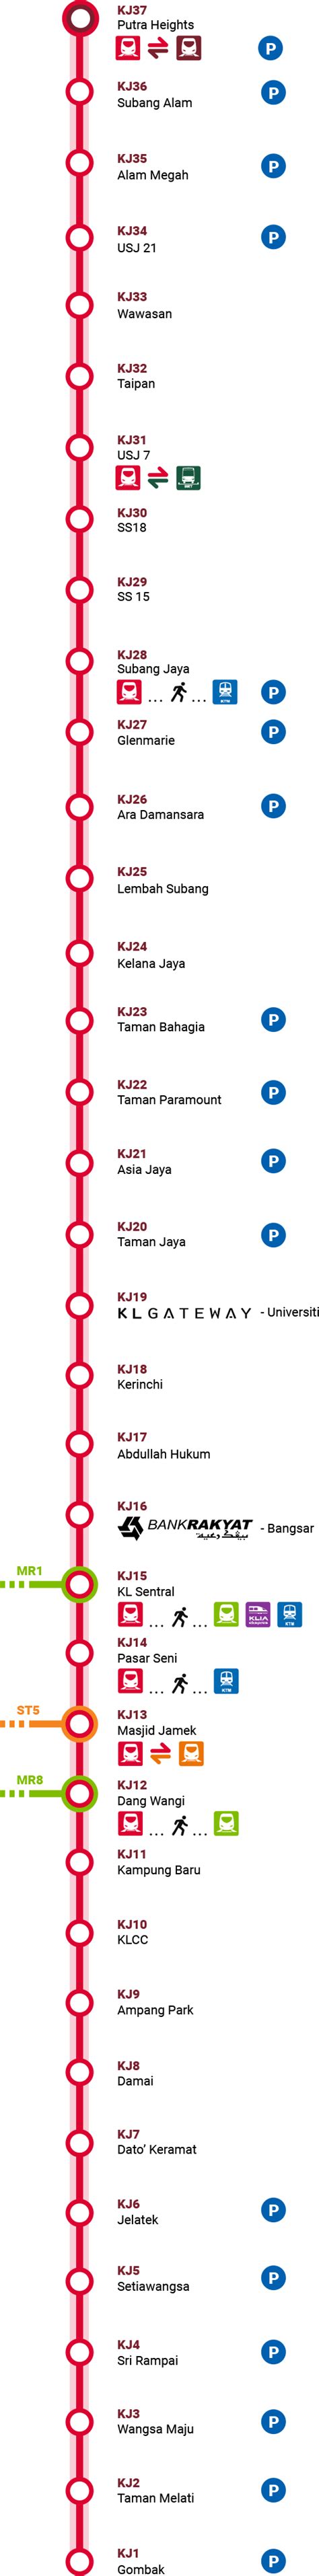 The lrt sri petaling line (laluan sri petaling) is a light rapid transit train route in the klang valley that runs through kuala lumpur city centre from sentul timur station at one end to putra heights station at the other end. Monorail and LRTs